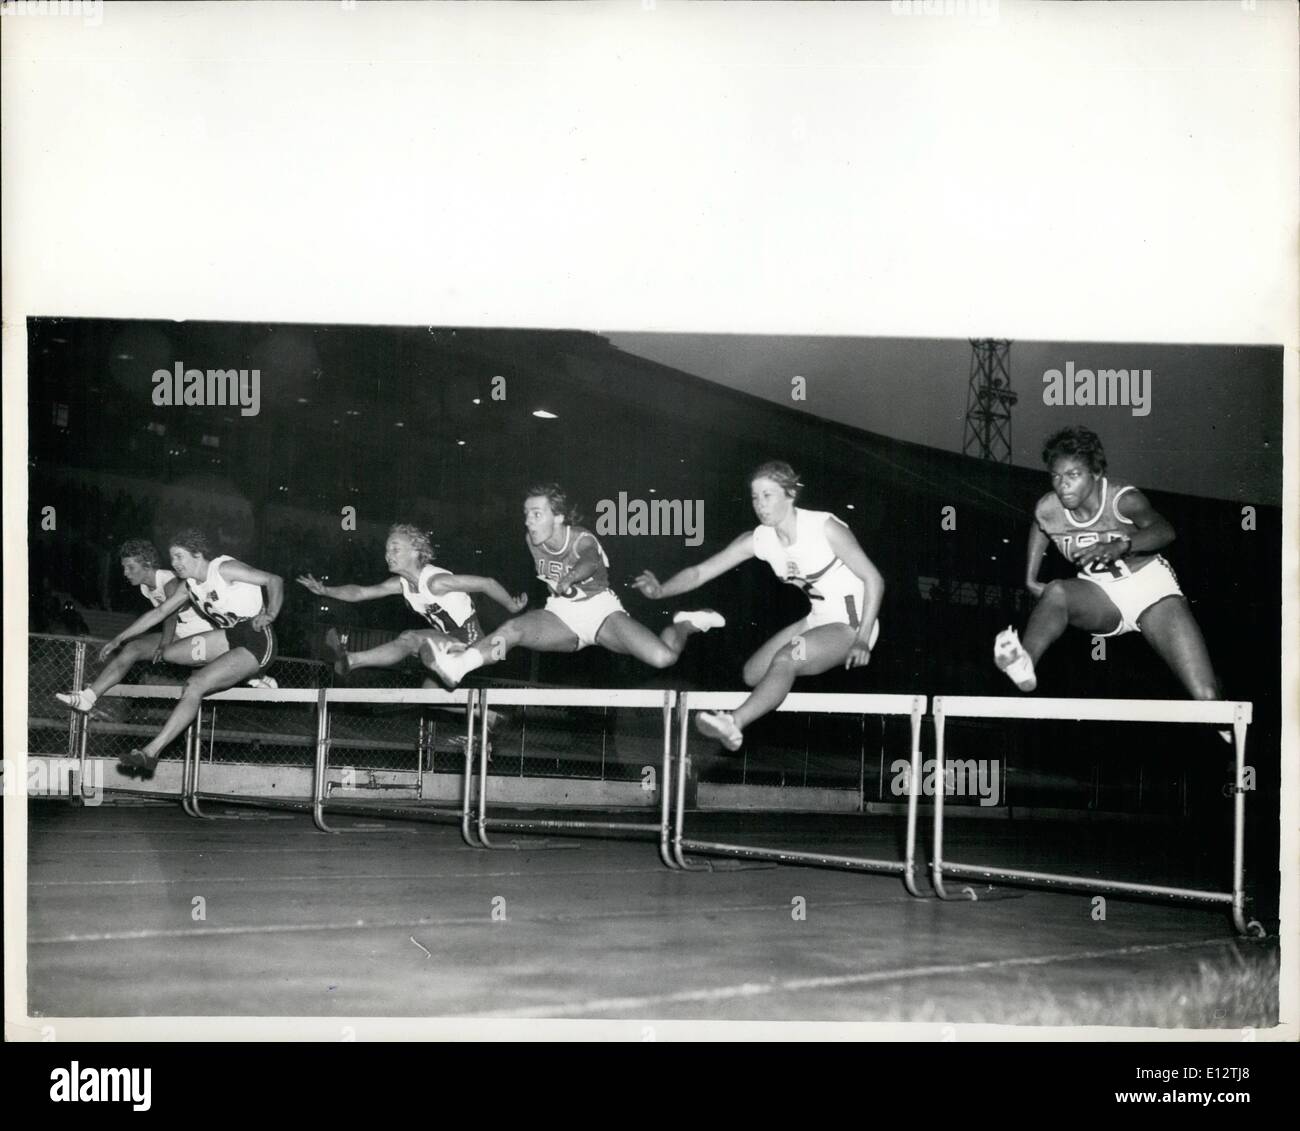 Feb. 24, 2012 - Britain Wins. London: First hurdle during the Women's 80 metres hurdles in the Britain and Commonwealth versus U.S.A. games at the White City Stadium here tonight. Britain's Carol Quinton won, with Mary Bignal, also of Britain second. 14th September, 1960 Stock Photo